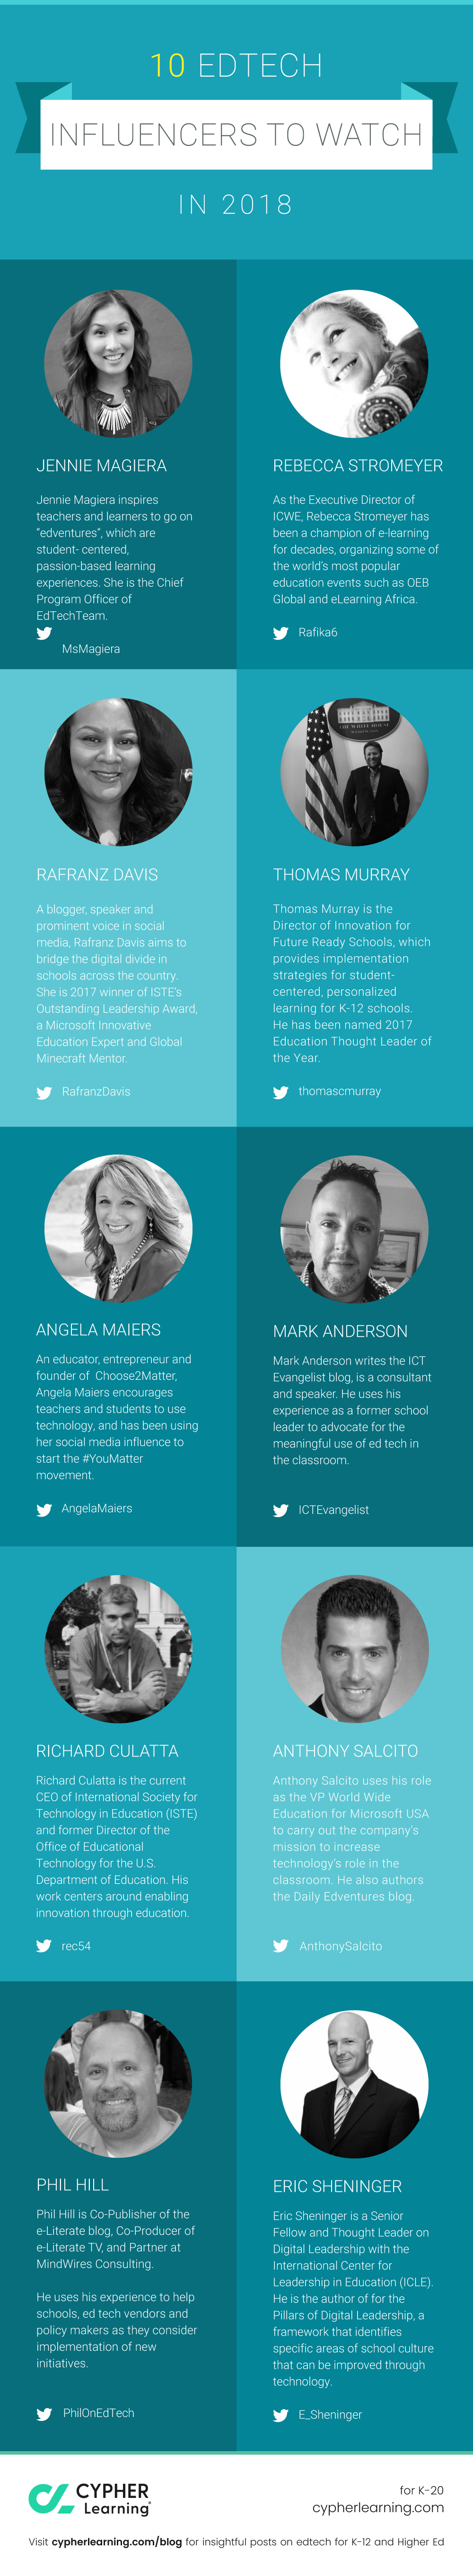 10 EdTech influencers to watch in 2018